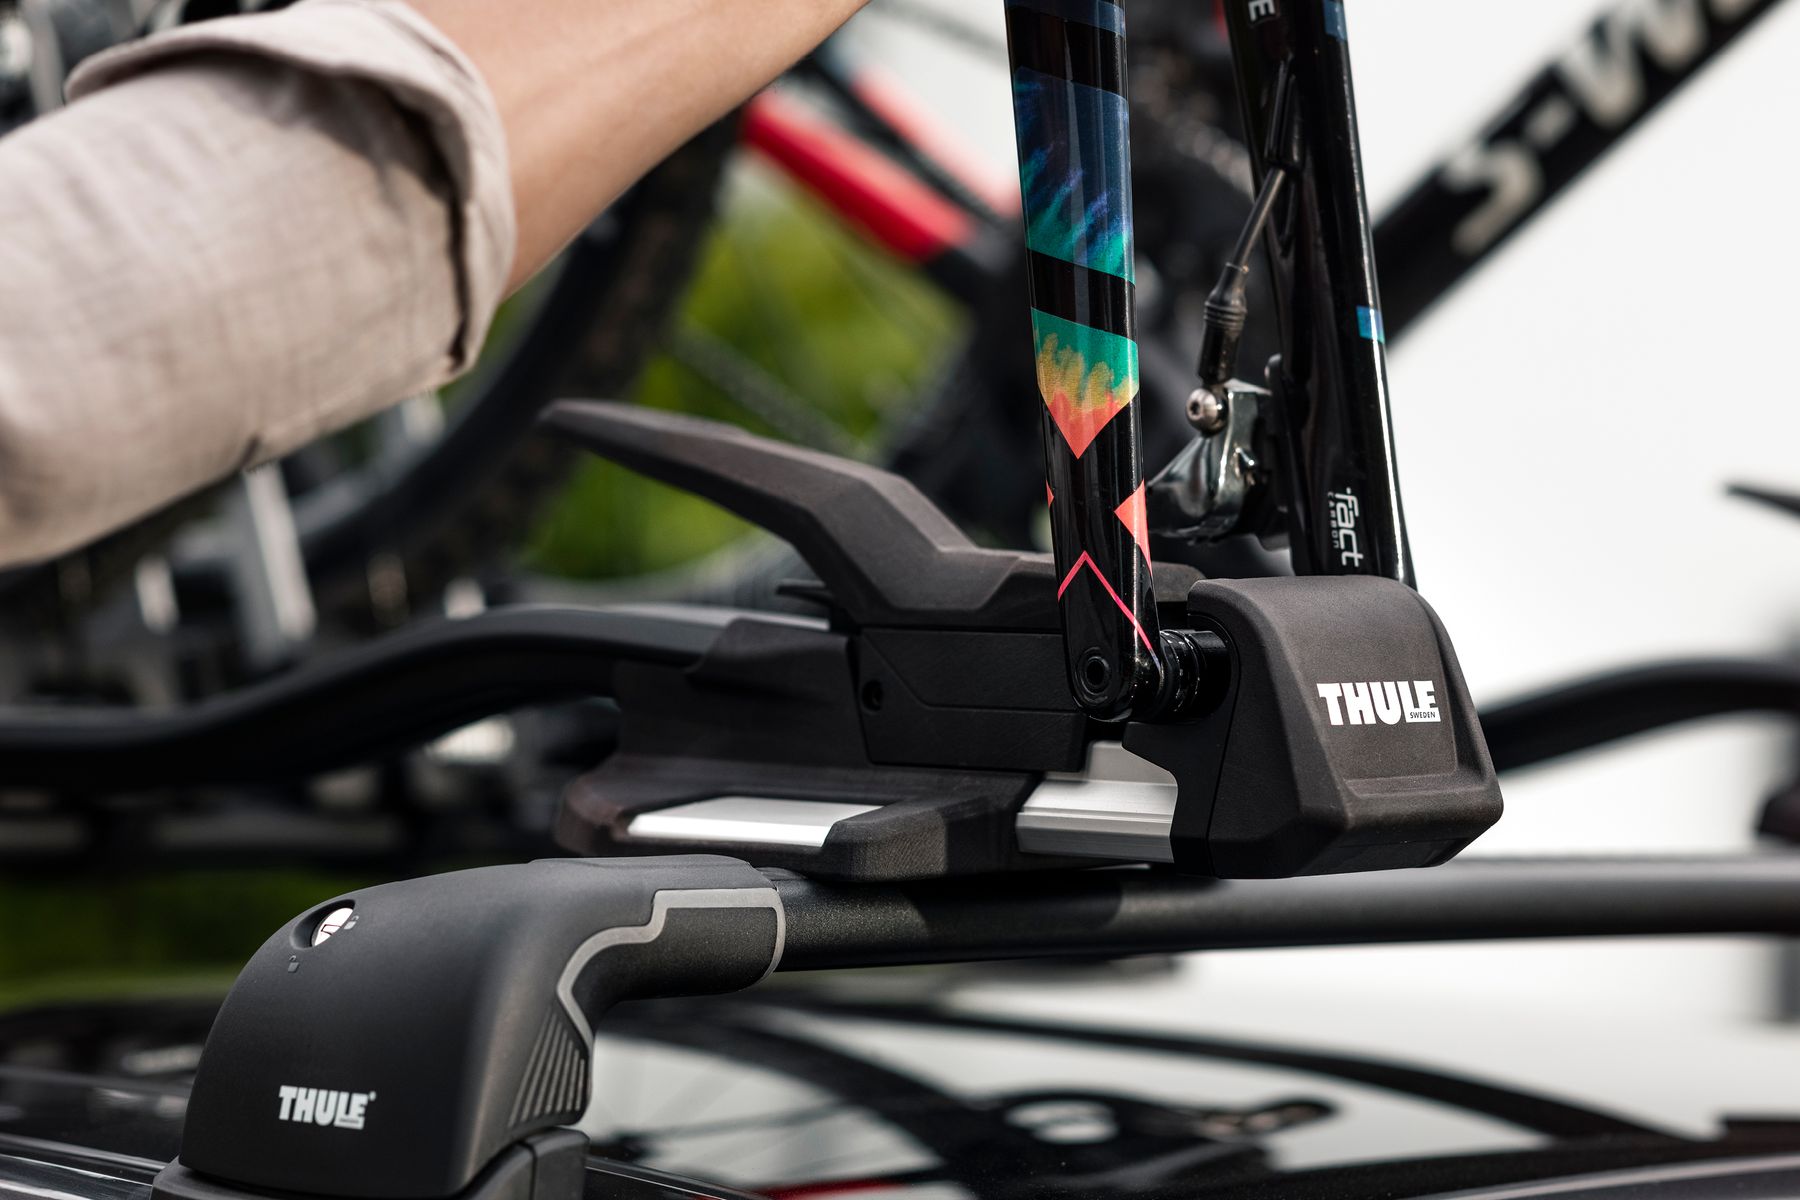 Thule TopRide lifestyle feature